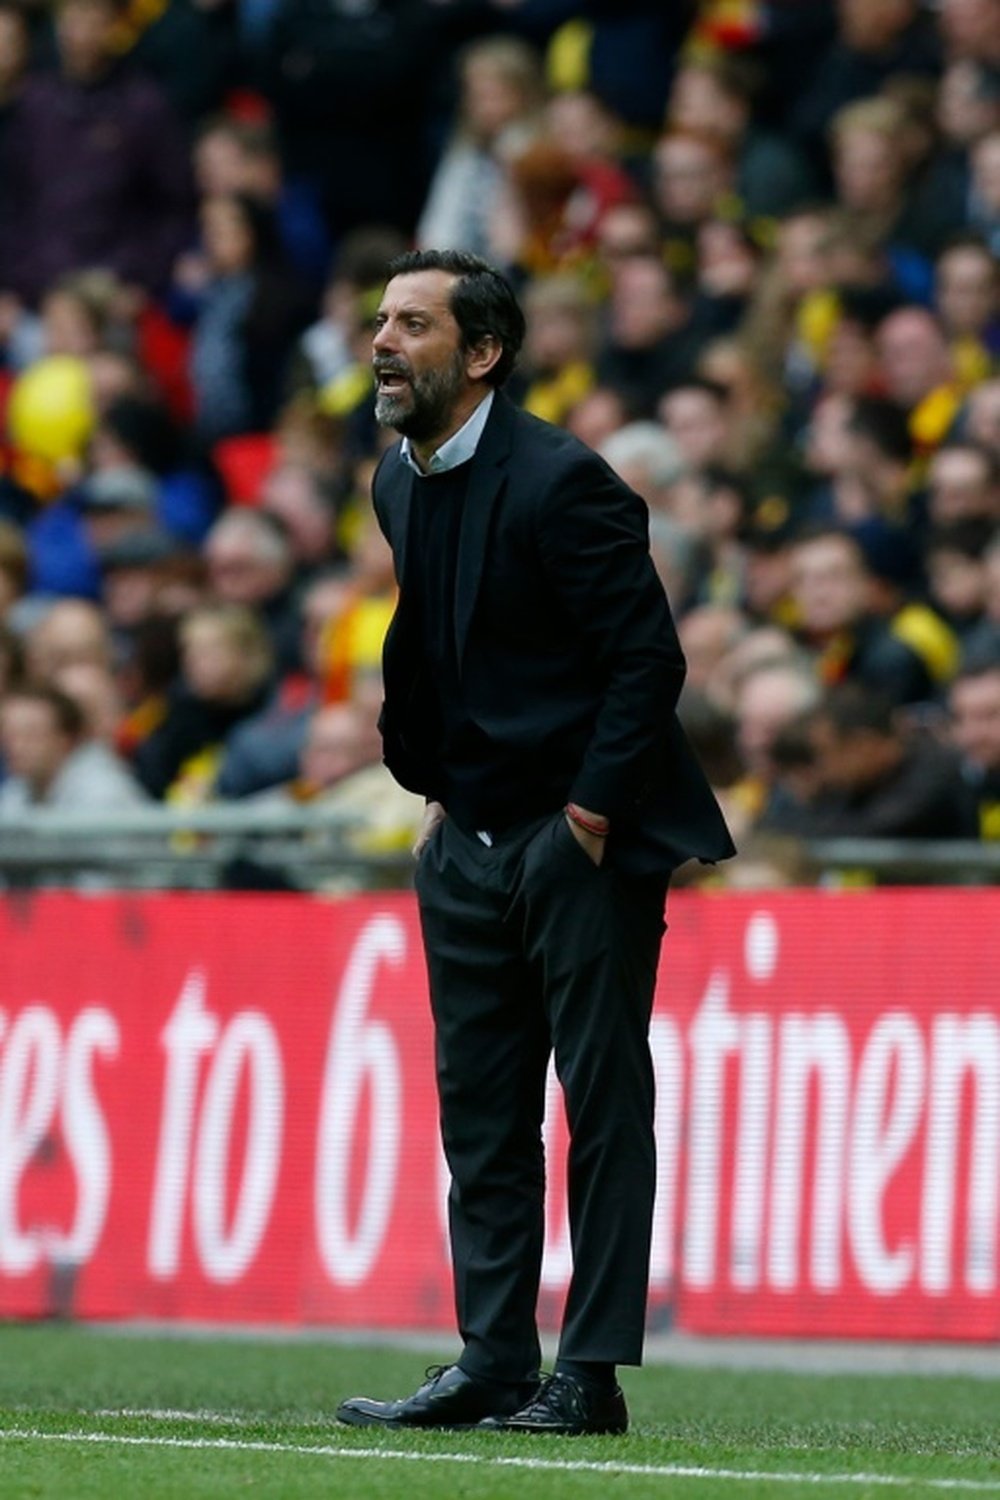 Quique Sanchez Flores has been appointed as the manager of Espanyol. BeSoccer